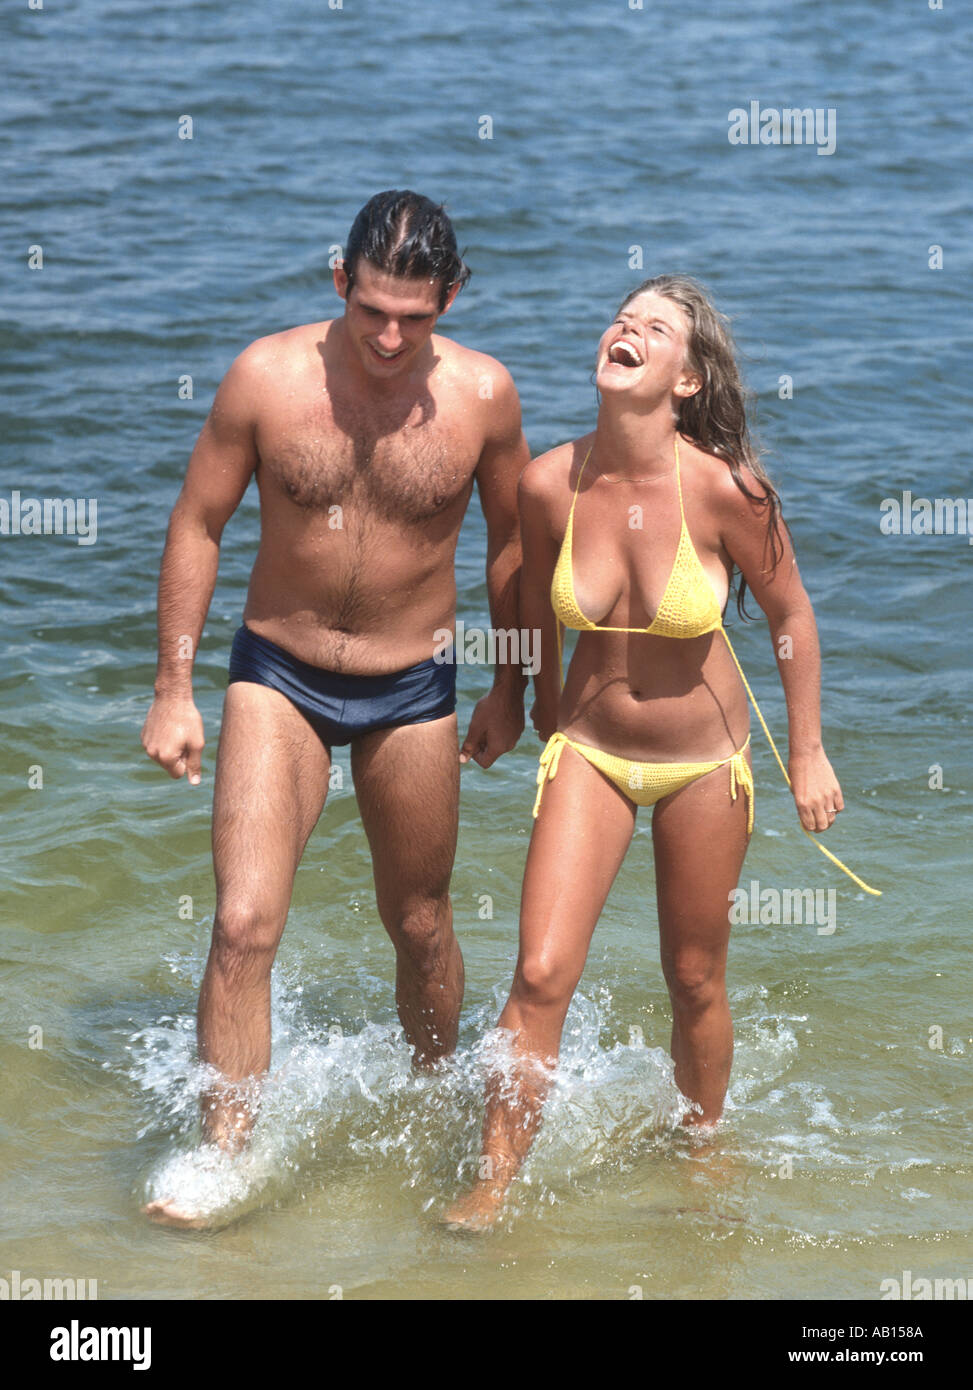 laughing couple emerging from the water after a swim Stock Photo